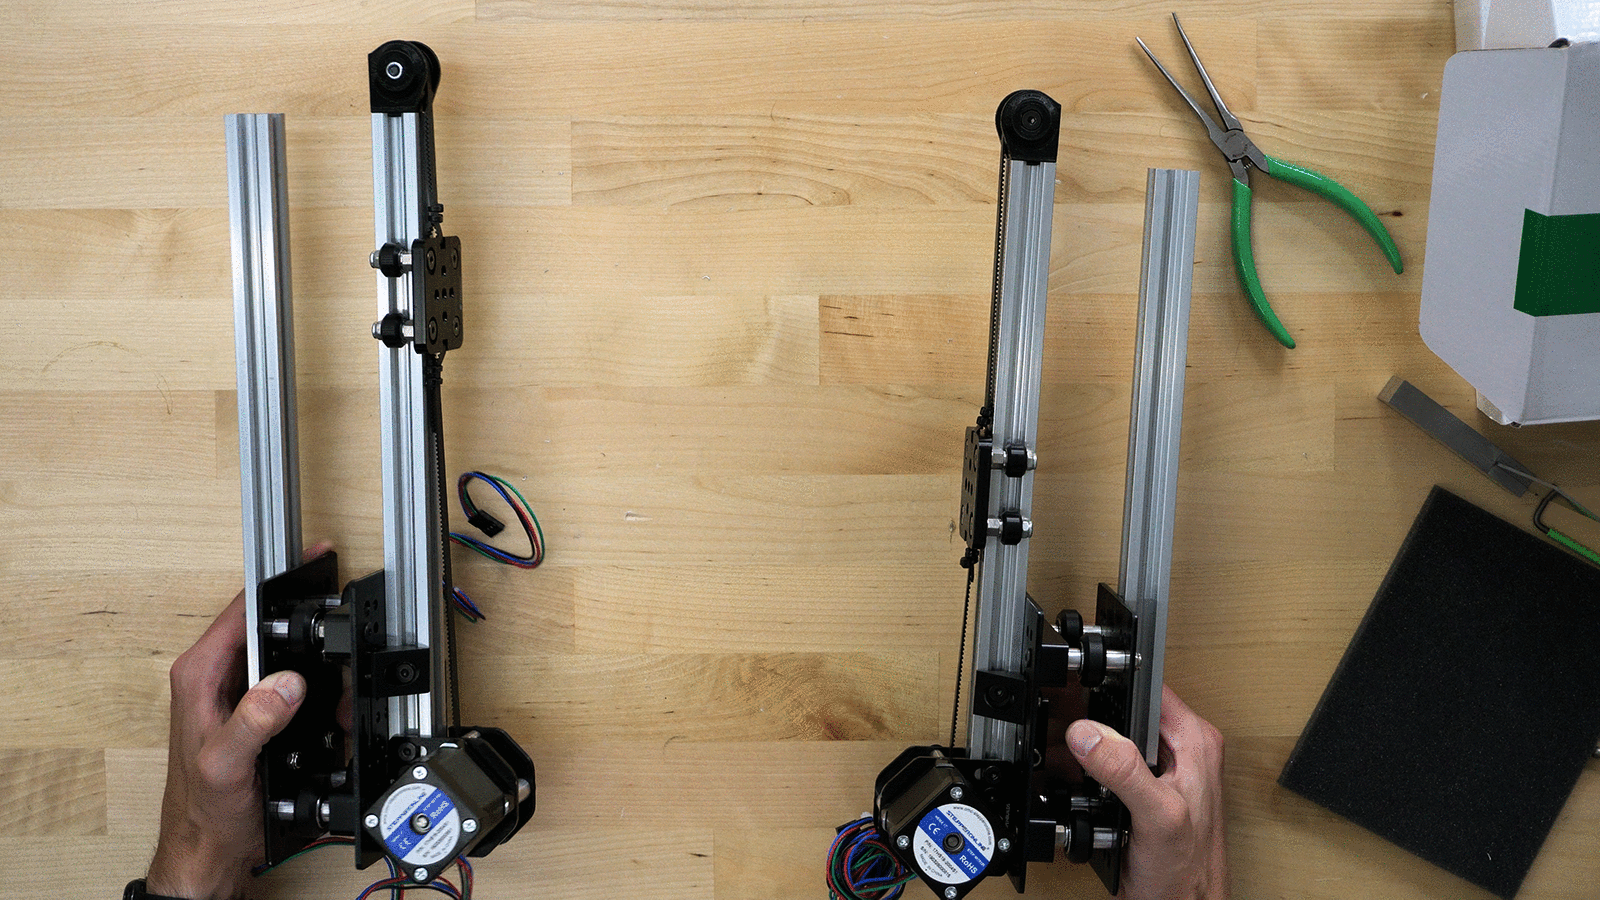 Attaching the X-axis to the Z-Carriage of Zidex